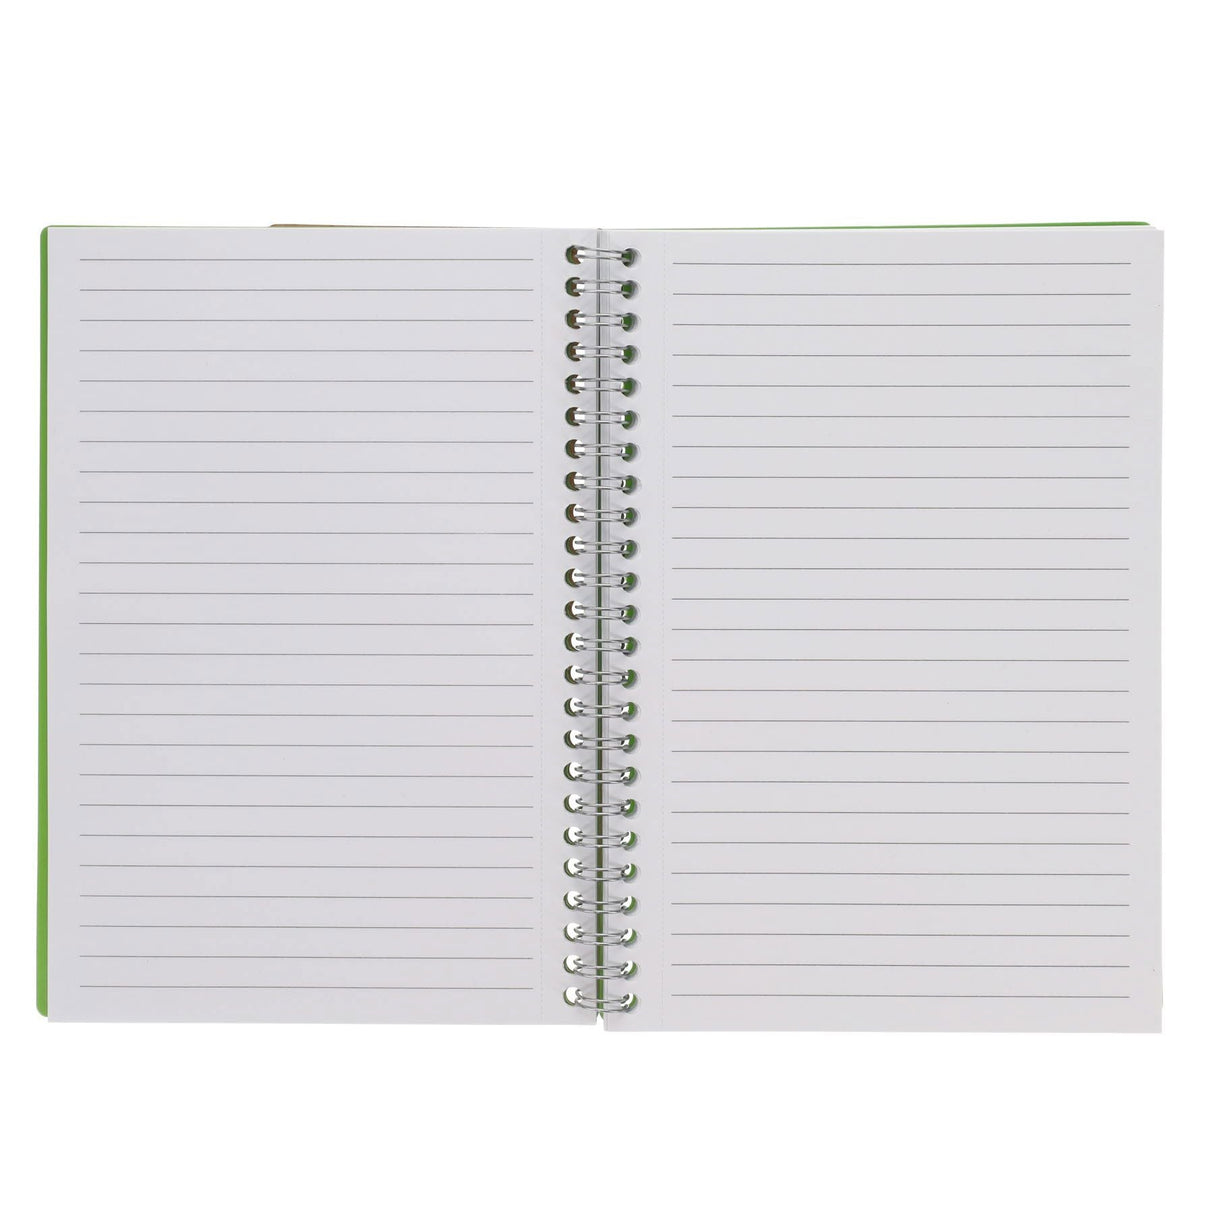 Concept Green A5 Notebook - 80 Sheets - Turquoise | Stationery Shop UK